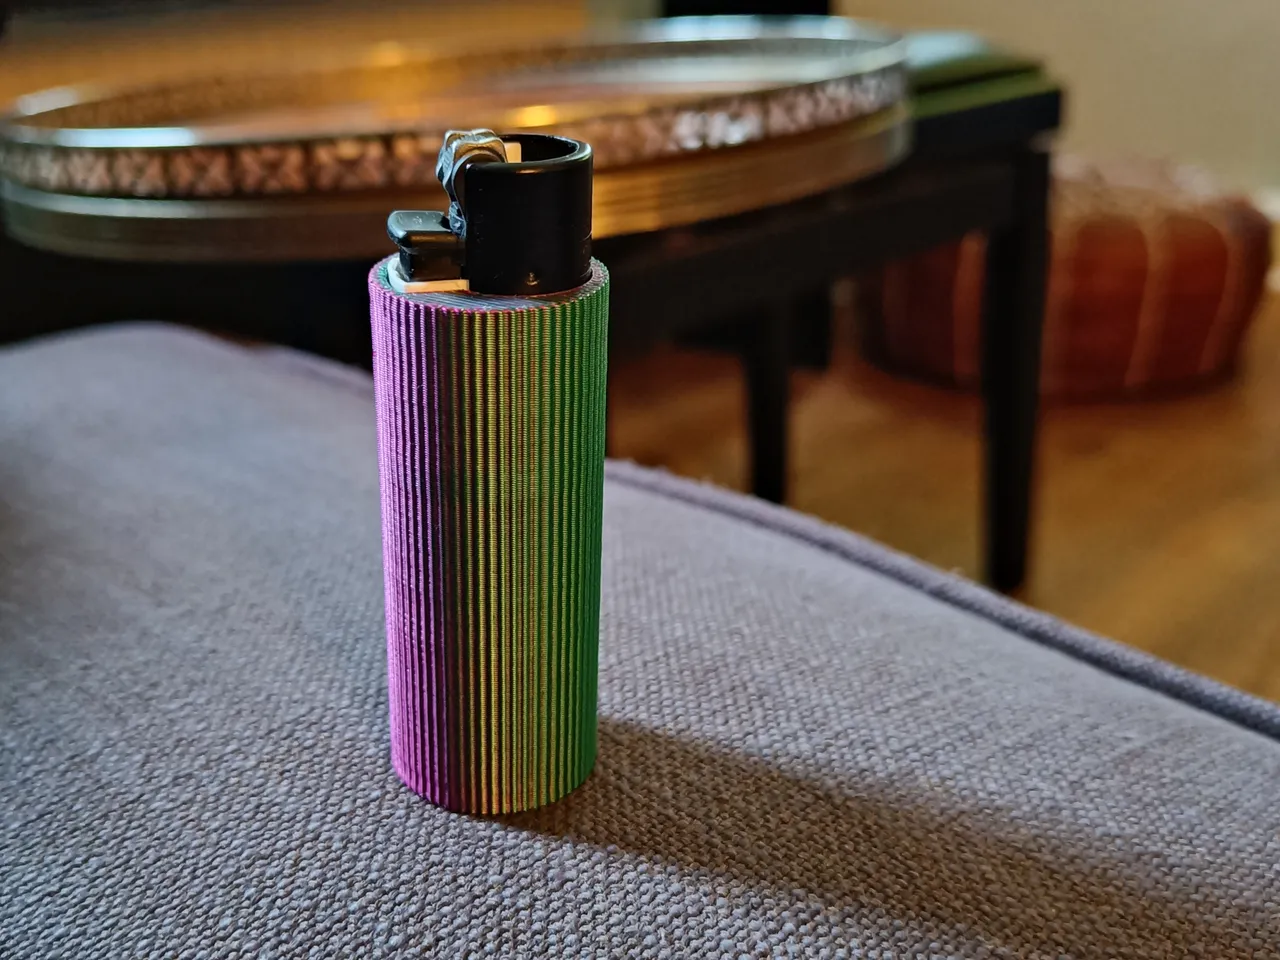 Clipper Lighter with Rubber Case